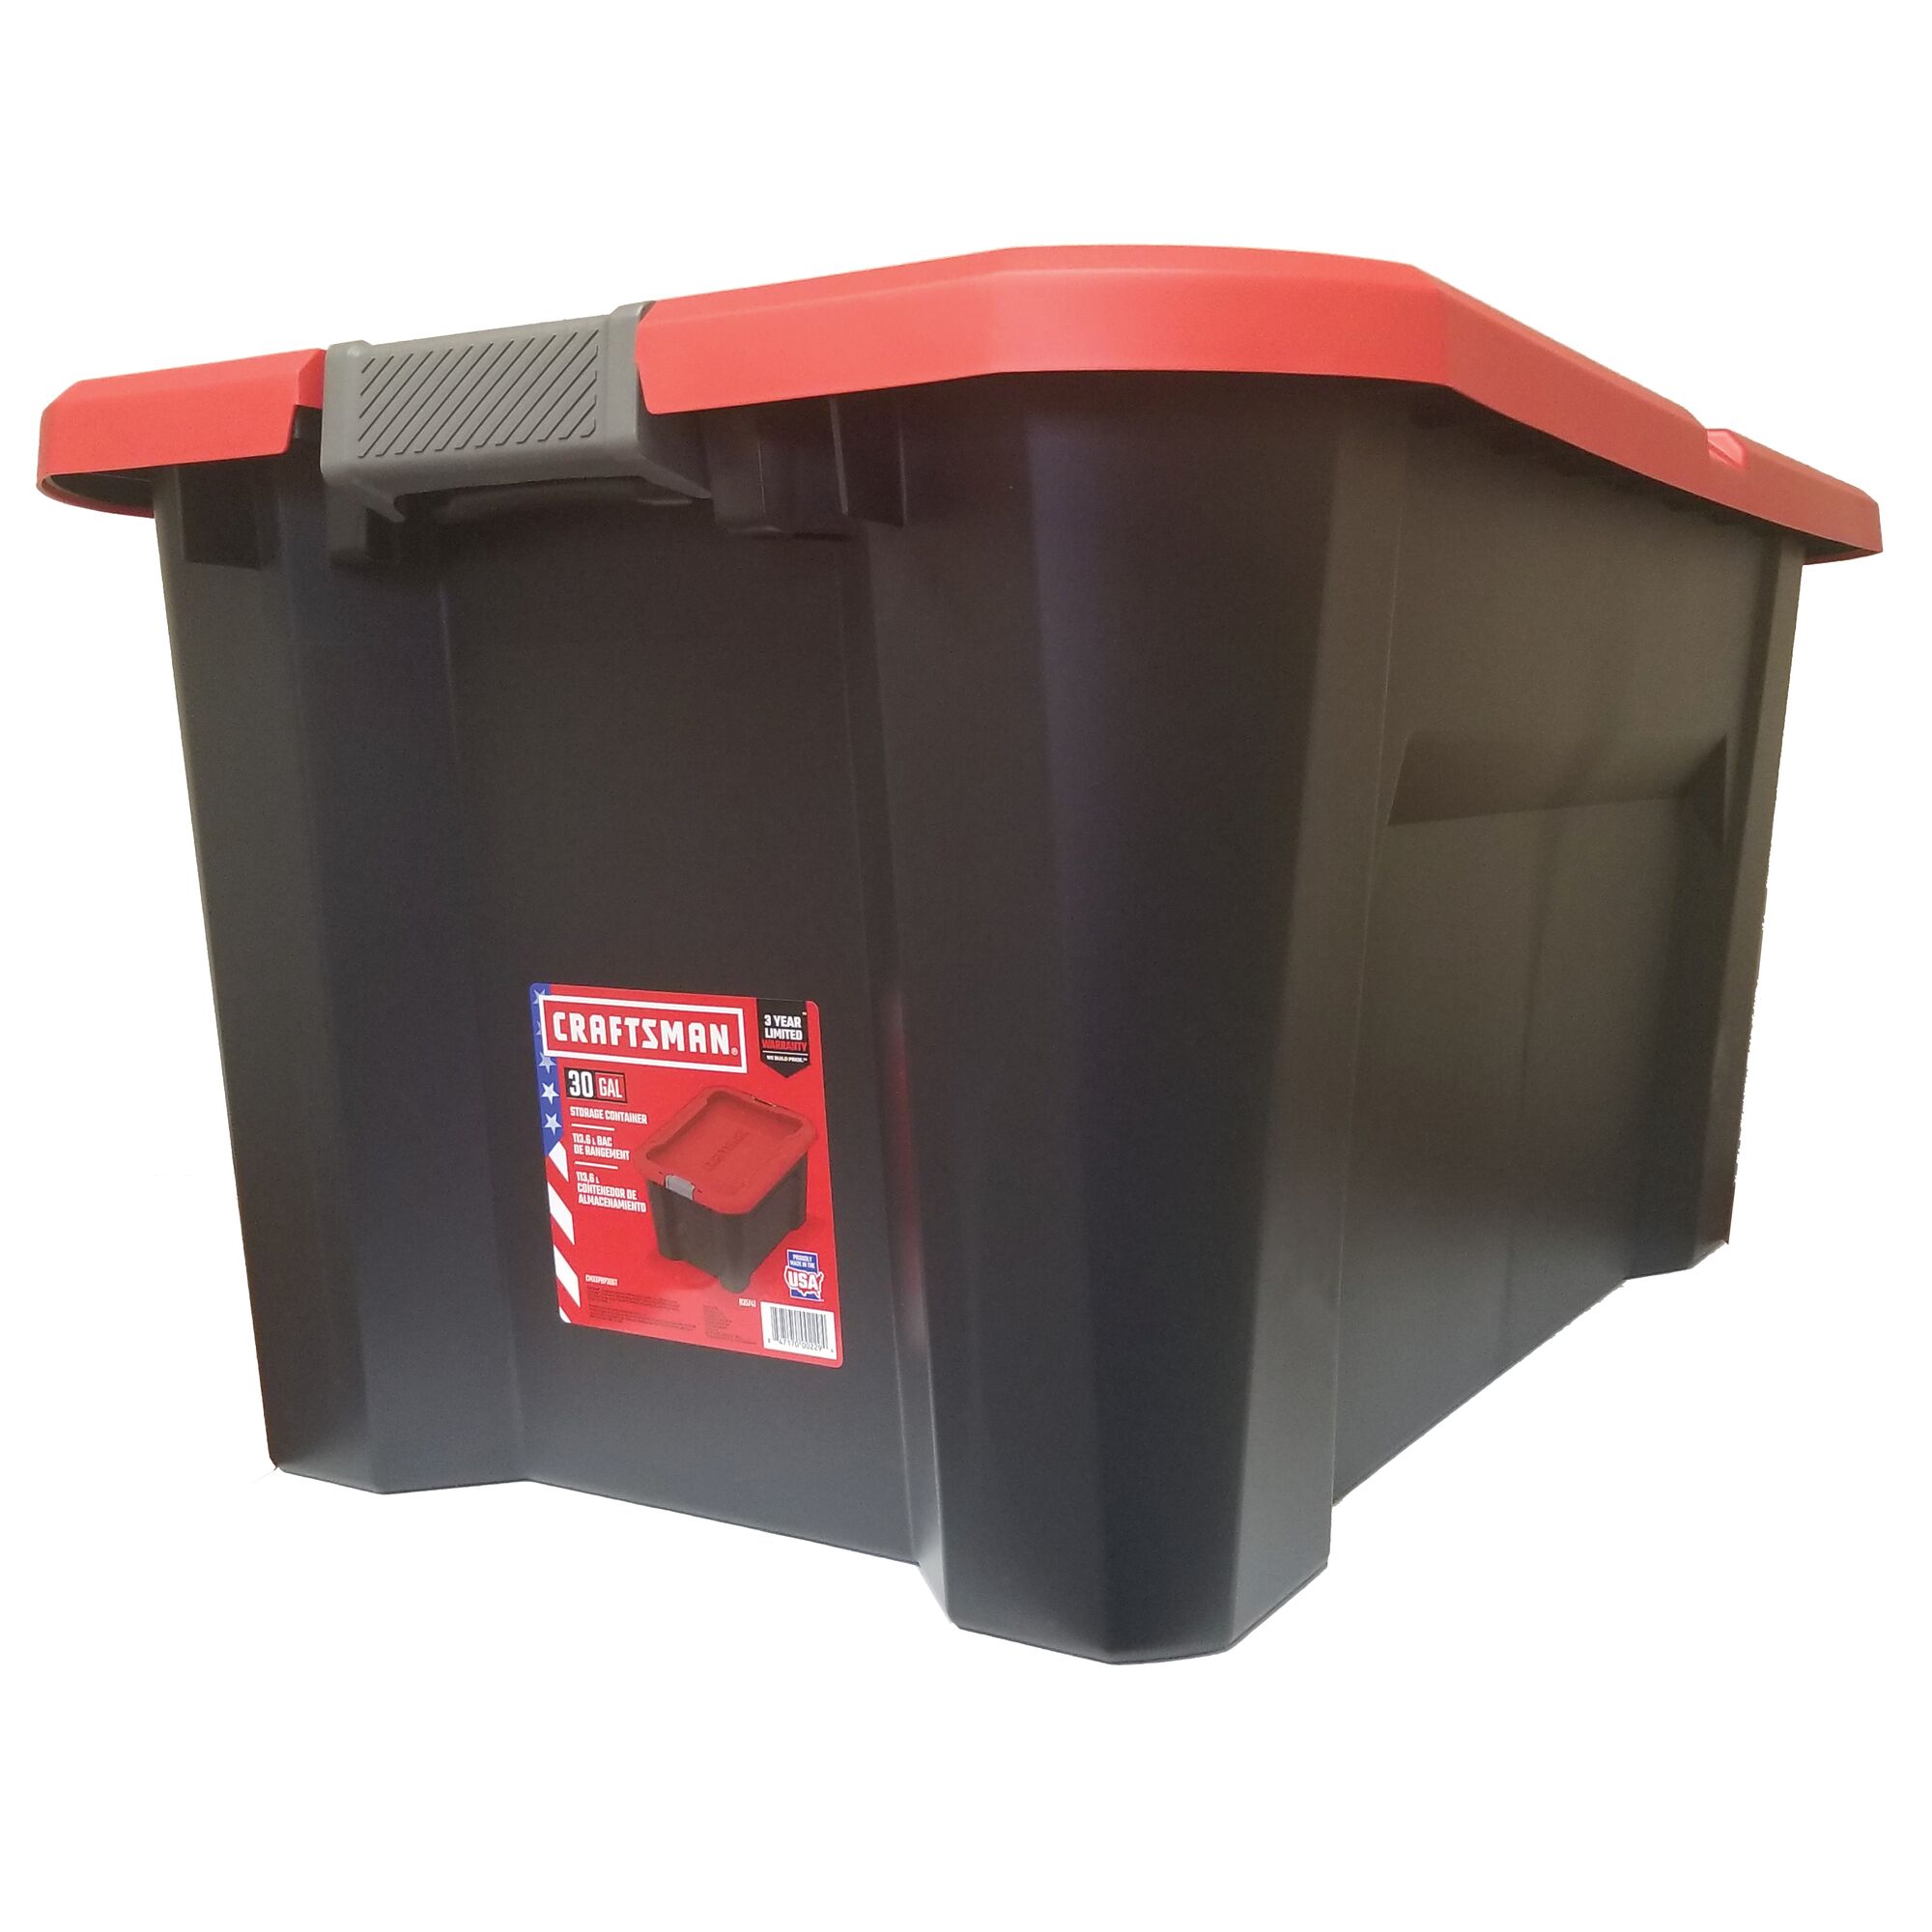 Right profile of 30 Gallon latching tote in packaging.